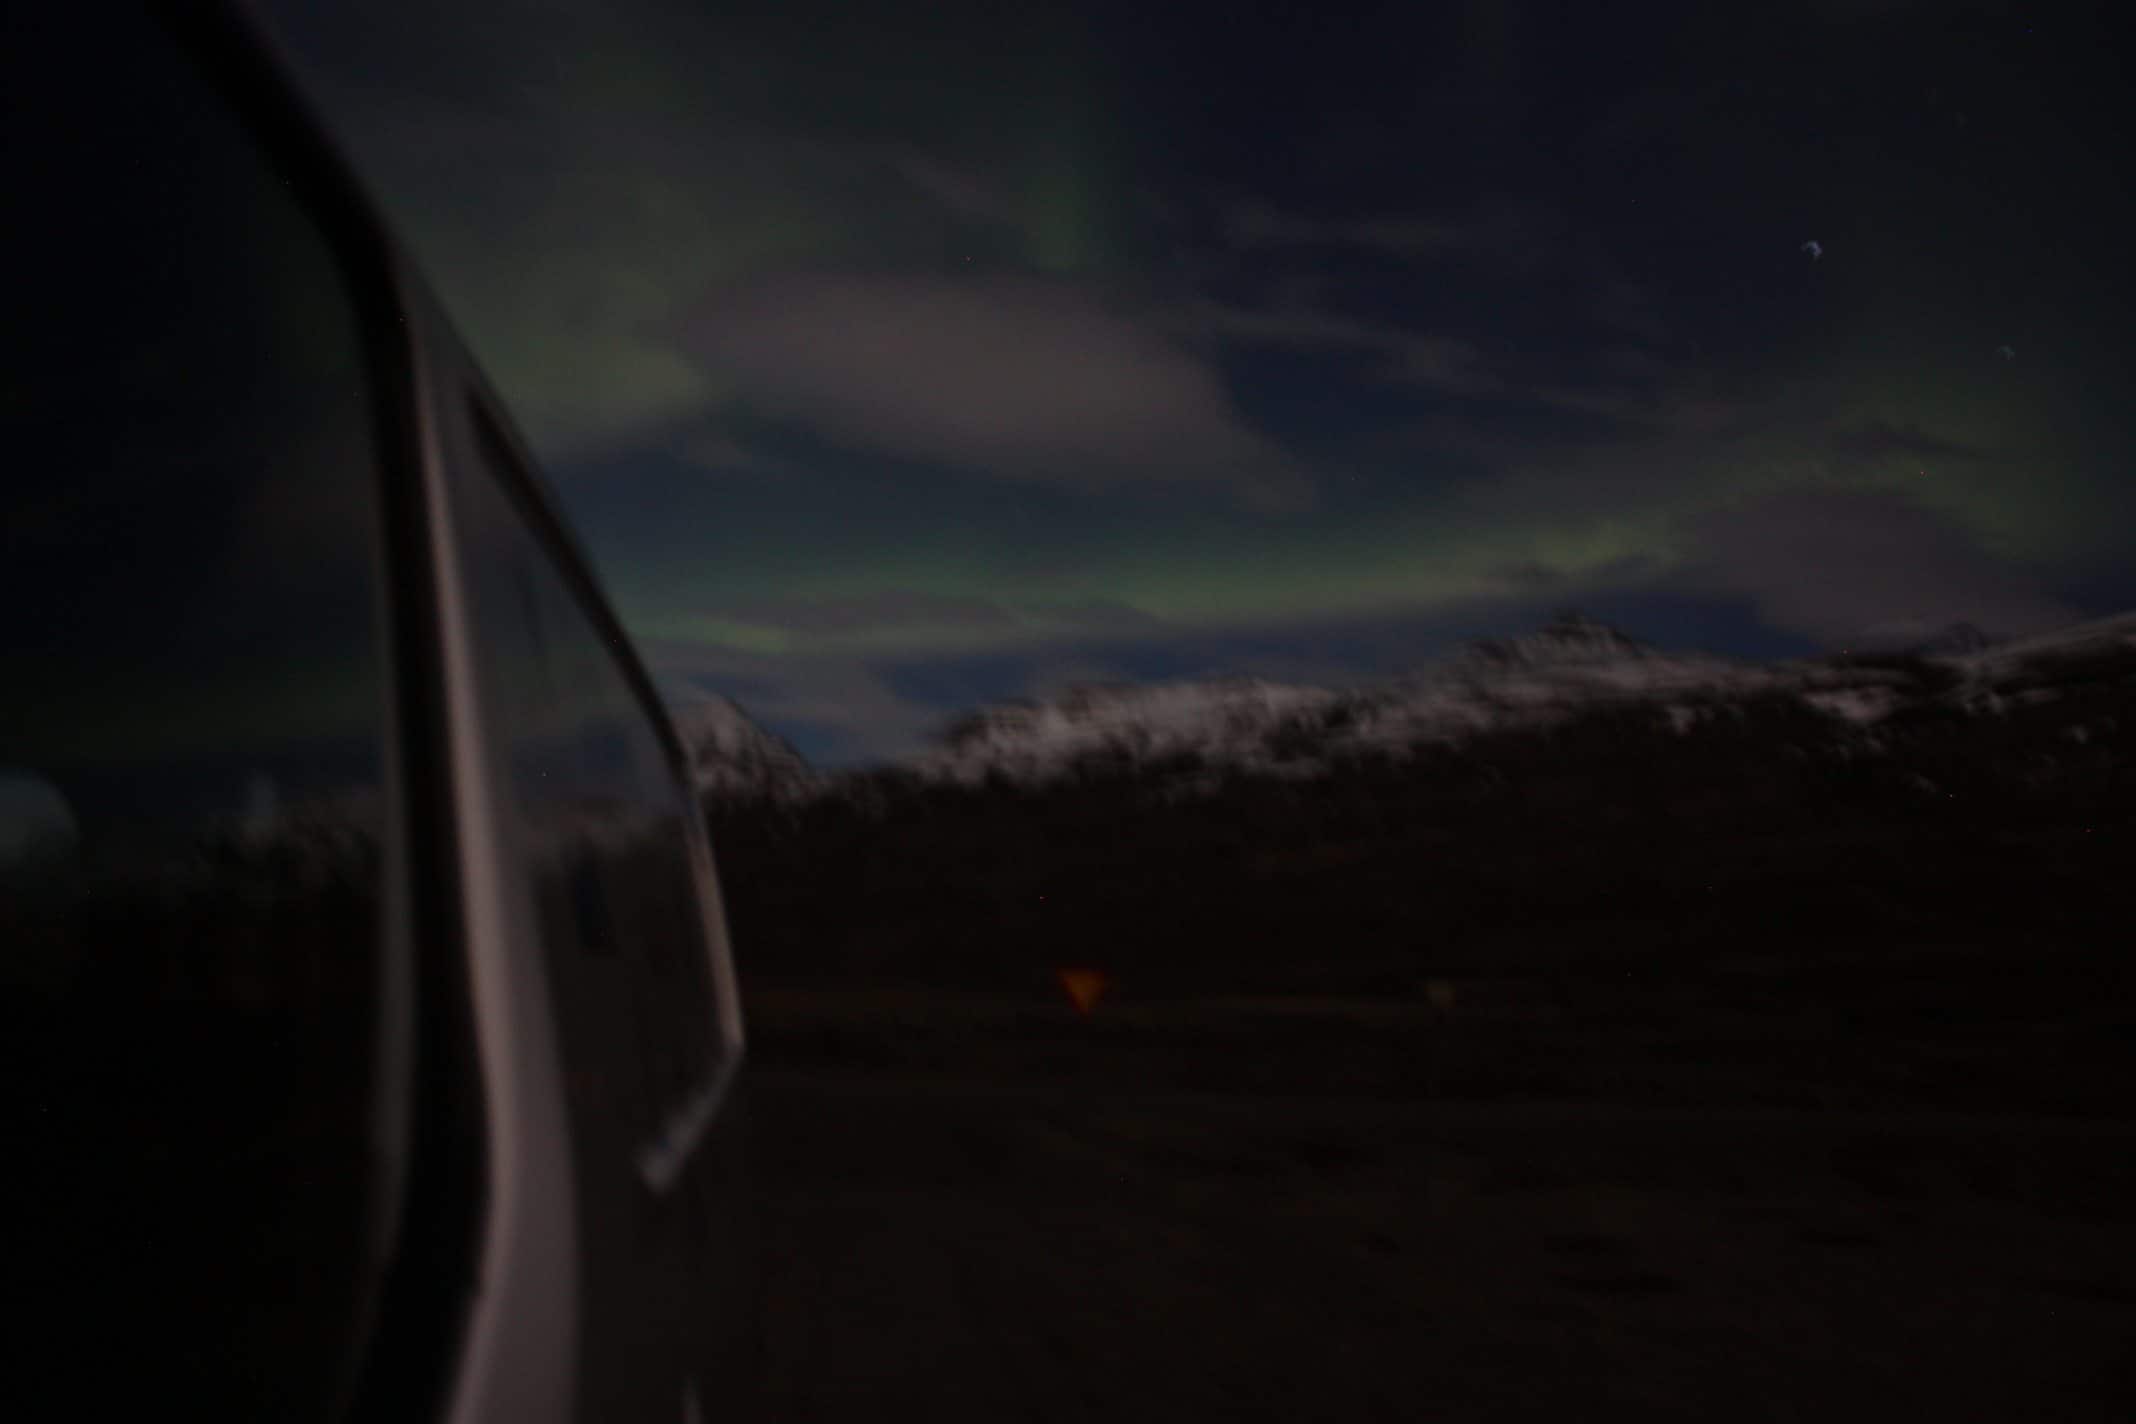 Northern lights in April